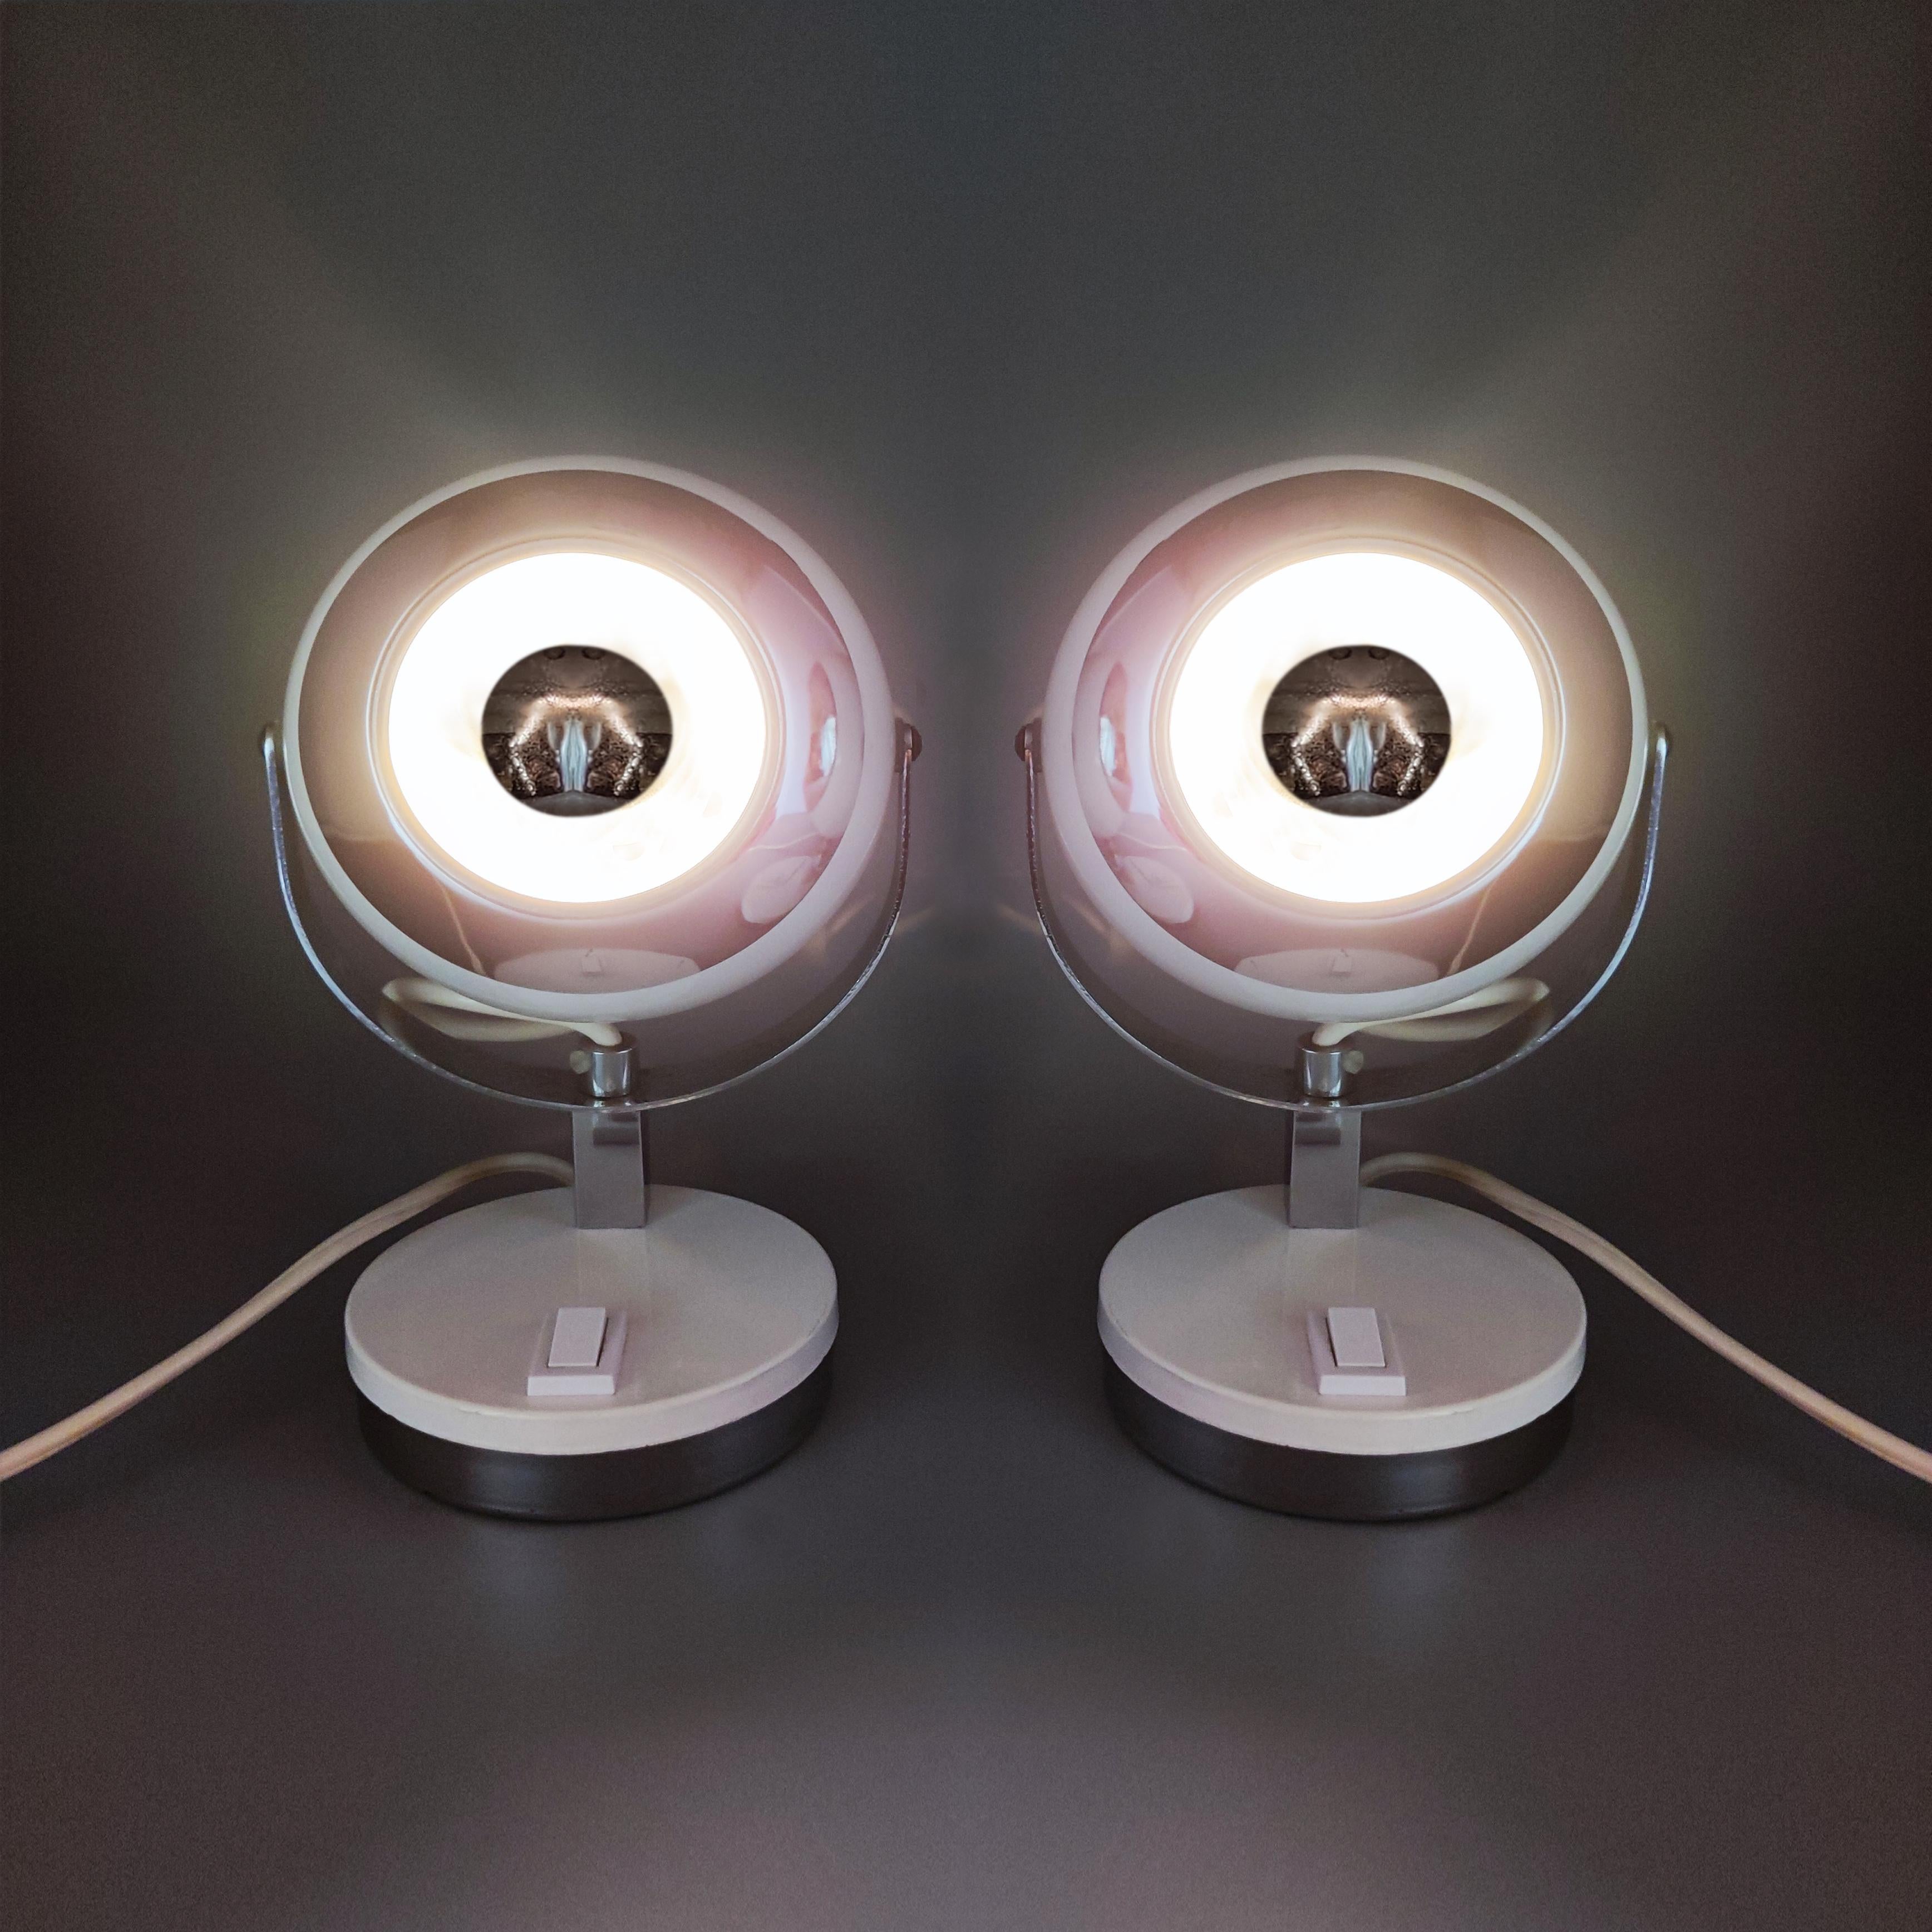 Metal 1970s Gorgeous Pair of White Eyeball Table Lamps by Veneta Lumi, Made in Italy For Sale